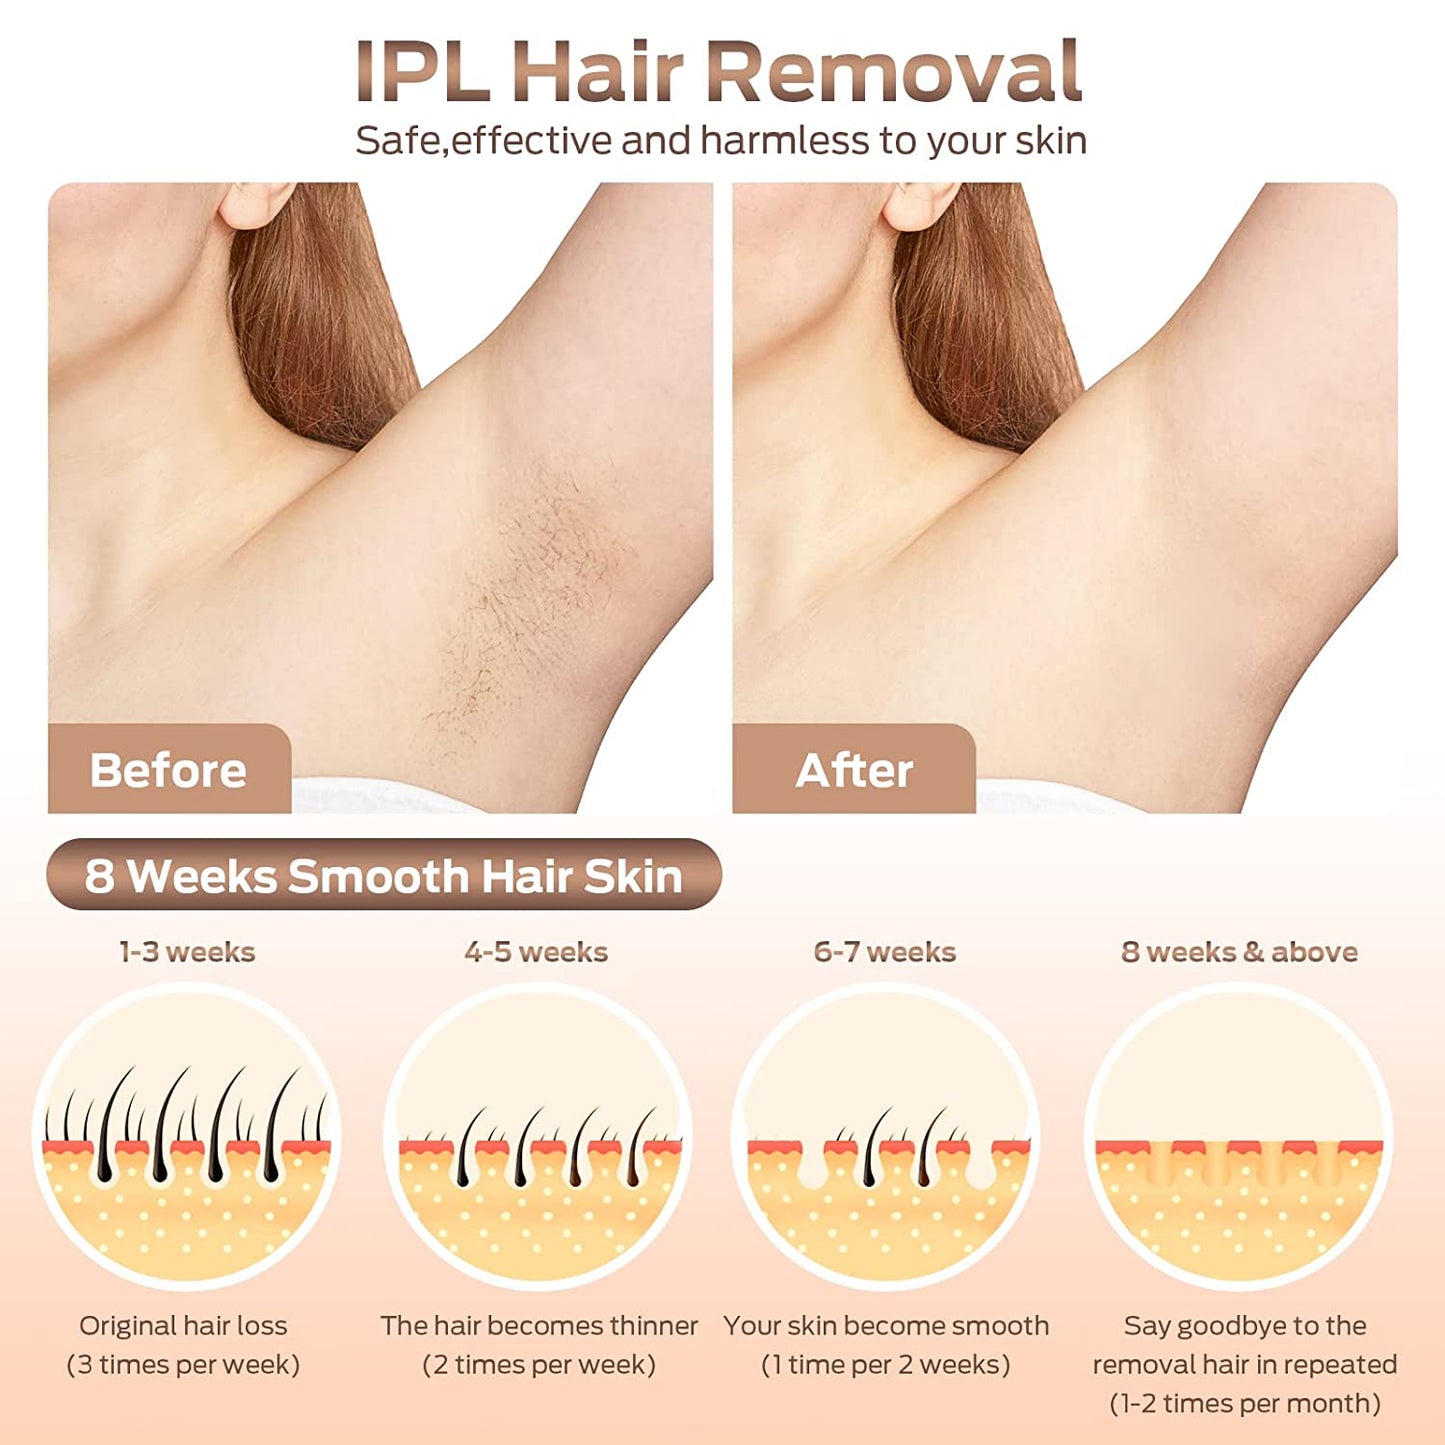 Laser Hair Removal, At-Home IPL Hair Removal for Women Permanent Hair Removal Device Upgraded to 999,900 Flashes Painless Hair Remover for Armpits Back Legs Arms Bikini Line